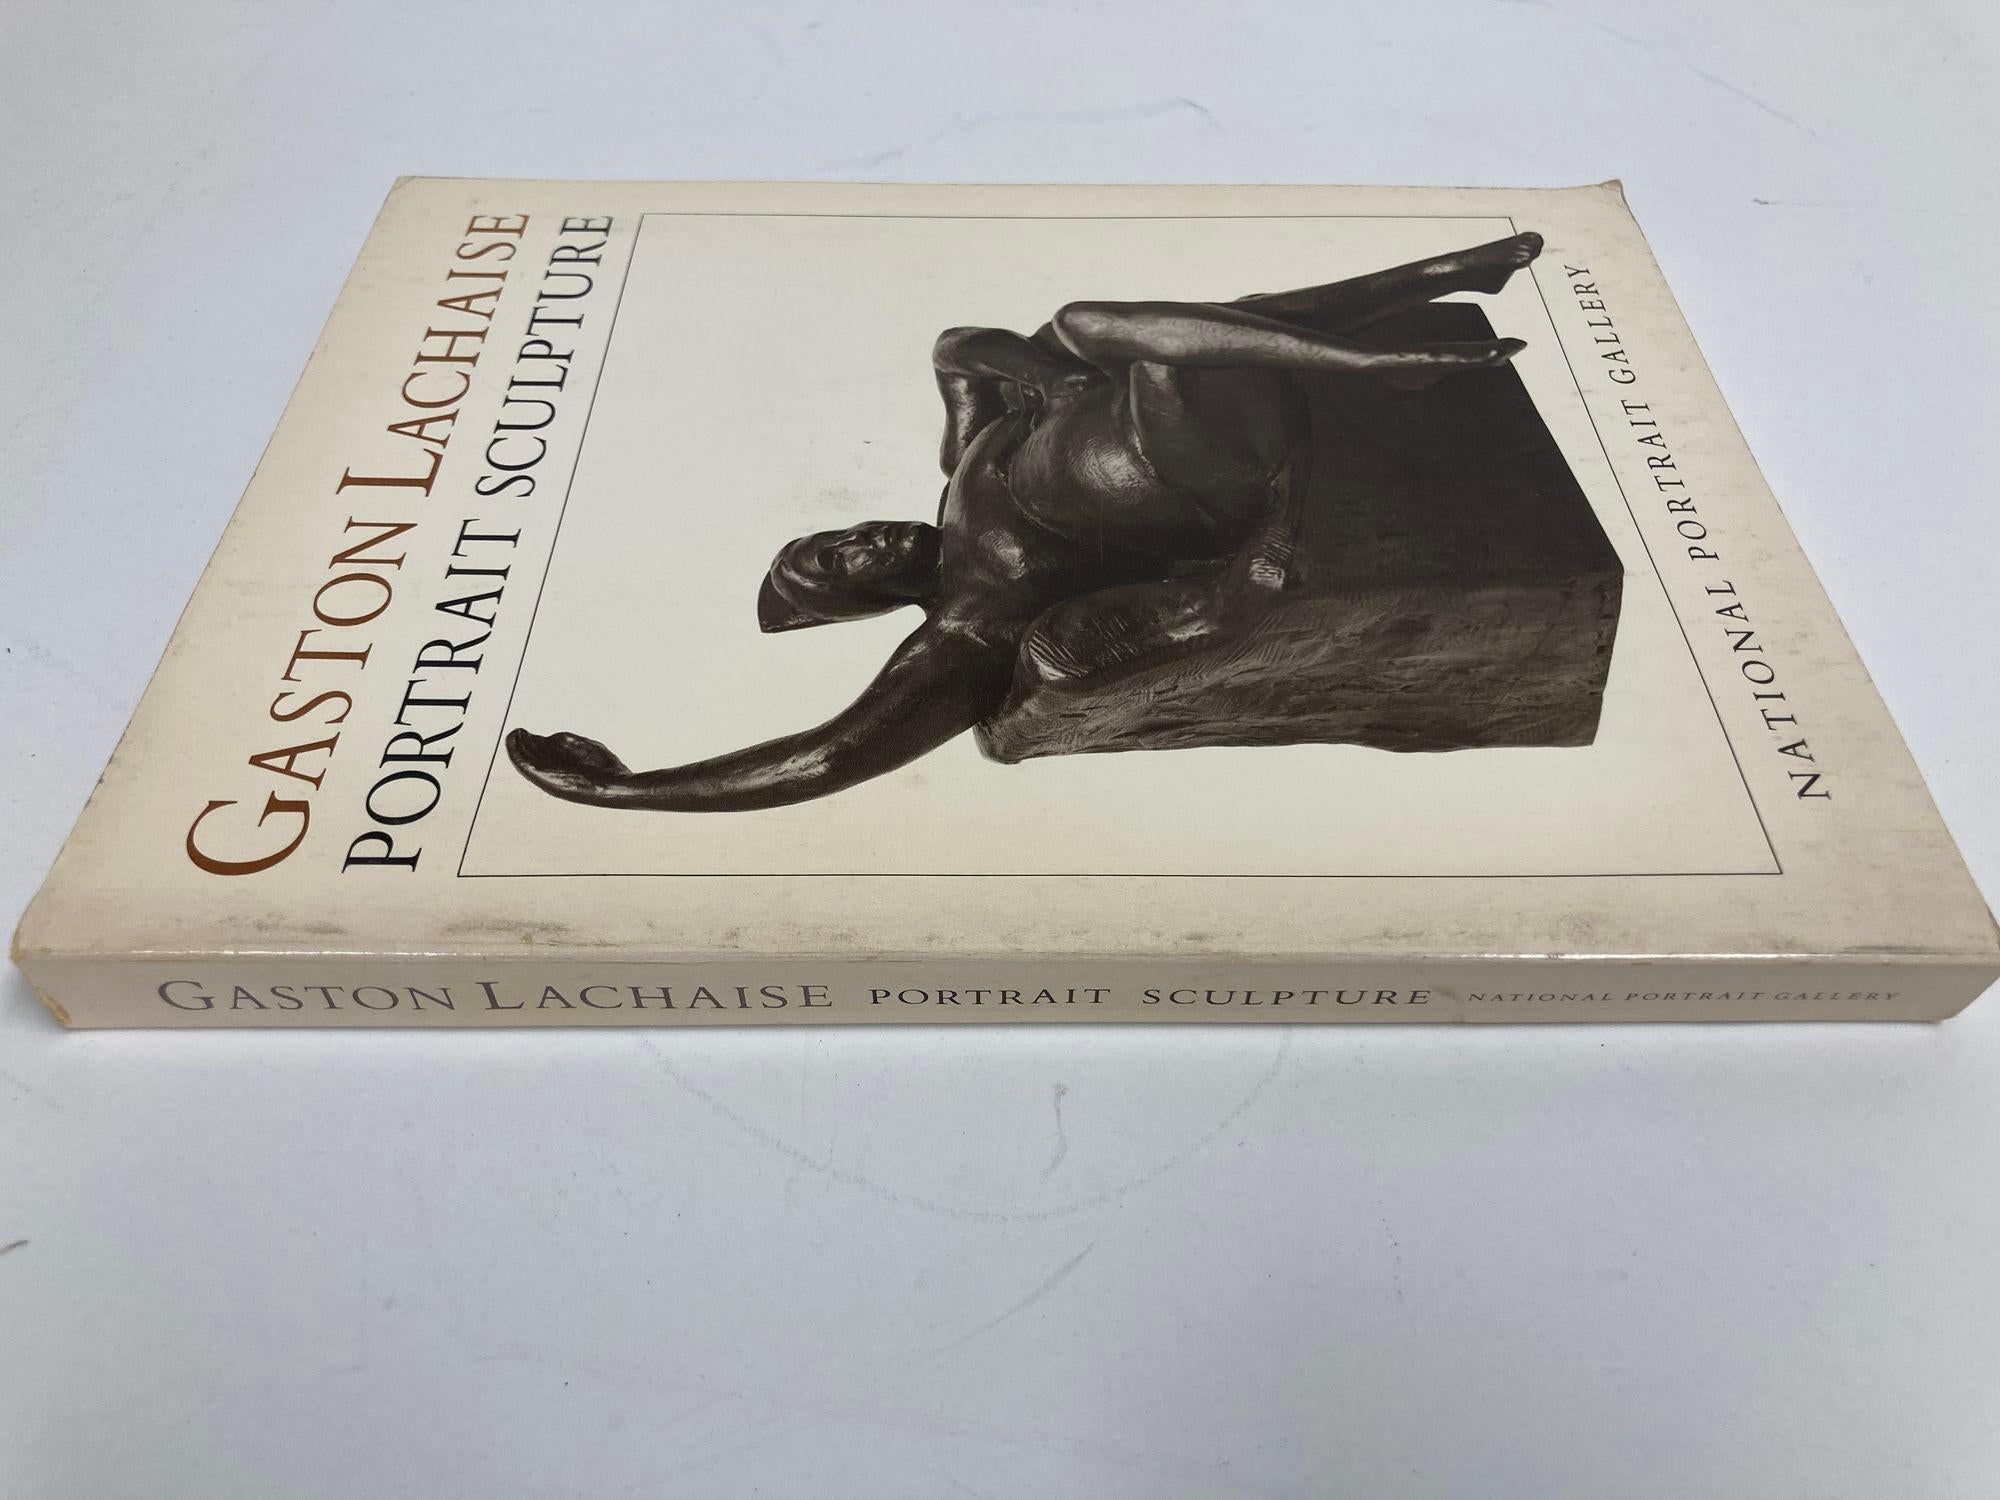 Gaston Lachaise: Portrait Sculpture by Carolyn Kinder Carr (Author), Margaret C.S. Christman (Author), Alan Fern (Foreword)
Paperback – May 31, 1985.
Publisher ‏ : ‎ National Portrait Gallery; First Edition (May 31, 1985).
Language ‏ : ‎